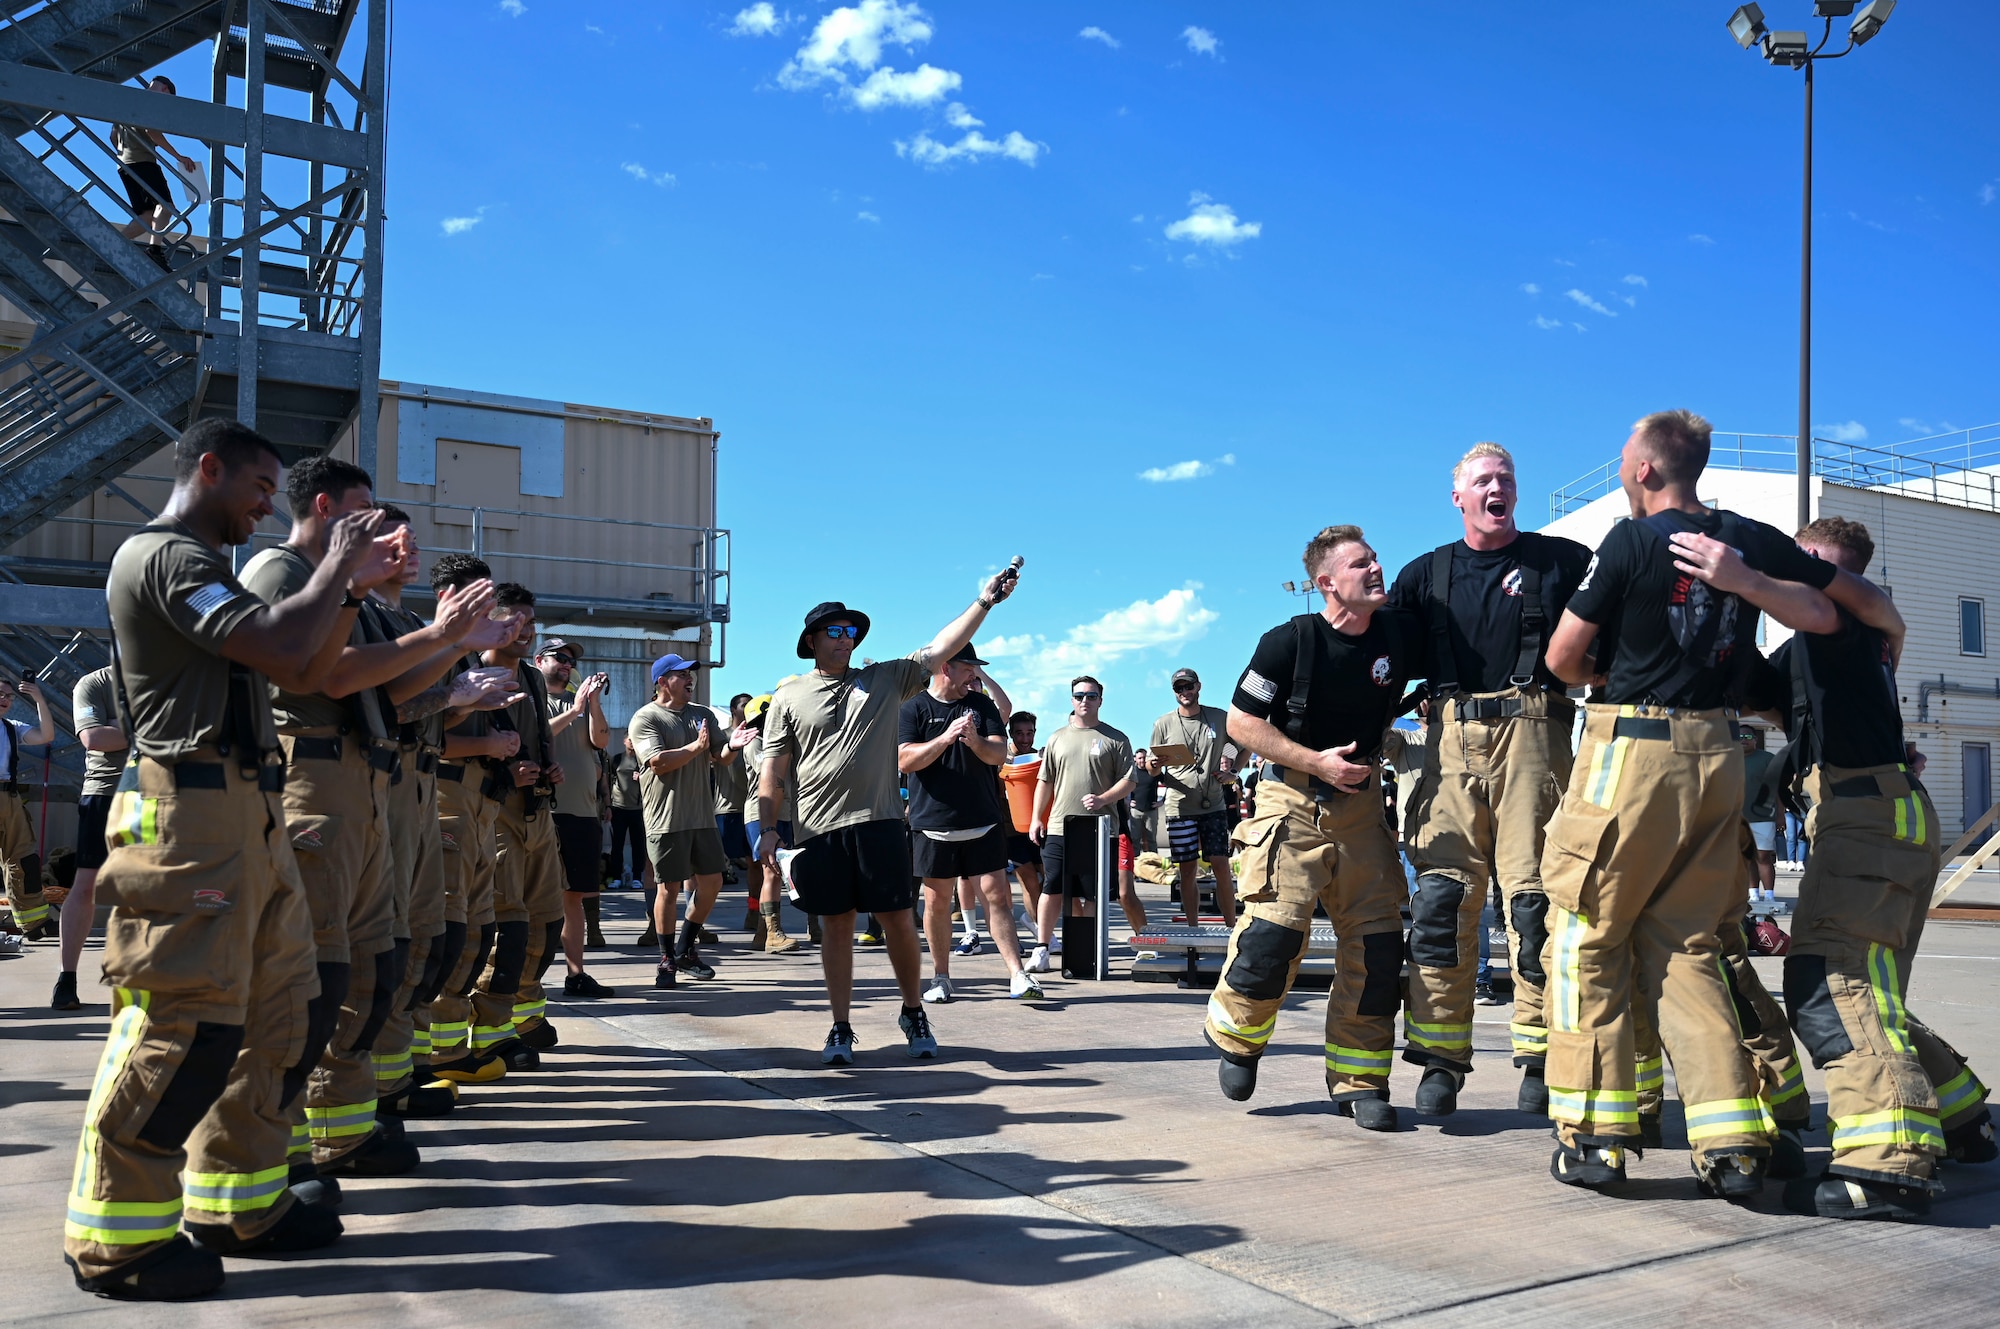 Members of the U.S. Air Force Wolf Pups team (right) celebrate their victory over the U.S. Army War Hammers team (left) after the final round of the combat challenge during the 11th Annual Blood, Sweat and Stairs event at the Louis F. Garland Department of Defense Fire Academy, Goodfellow Air Force Base, Texas, Sept. 9, 2023. Students and instructors faced off in timed endurance and strength challenges through multiple rounds competing as teams of five throughout the day; these challenges simulated different abilities firefighters must have when participating in rescue operations such as the 9/11 terrorist attacks. (U.S. Air Force photo by Airman 1st Class Madison Collier)